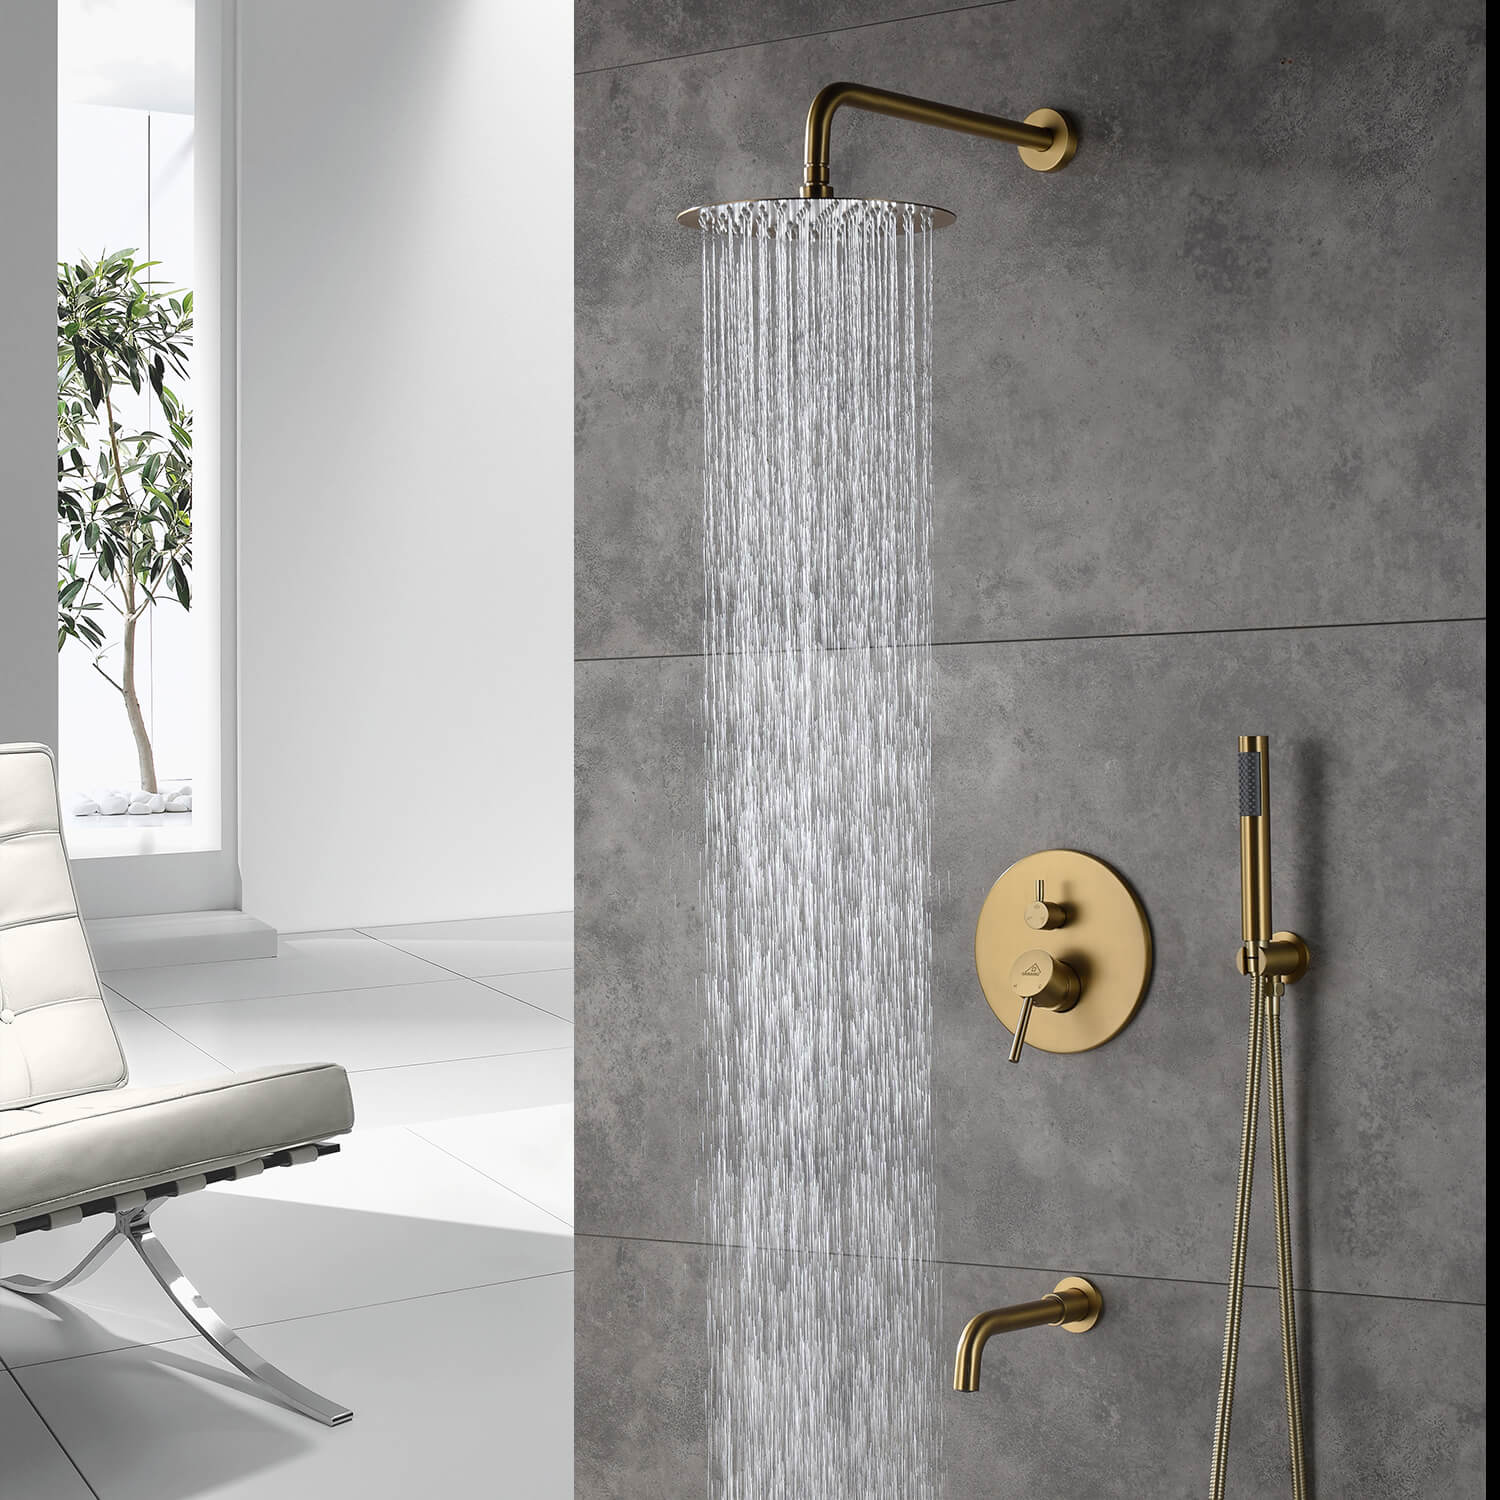 Concealed Shower Faucet Minimalist Two Function Wall-mounted Shower System